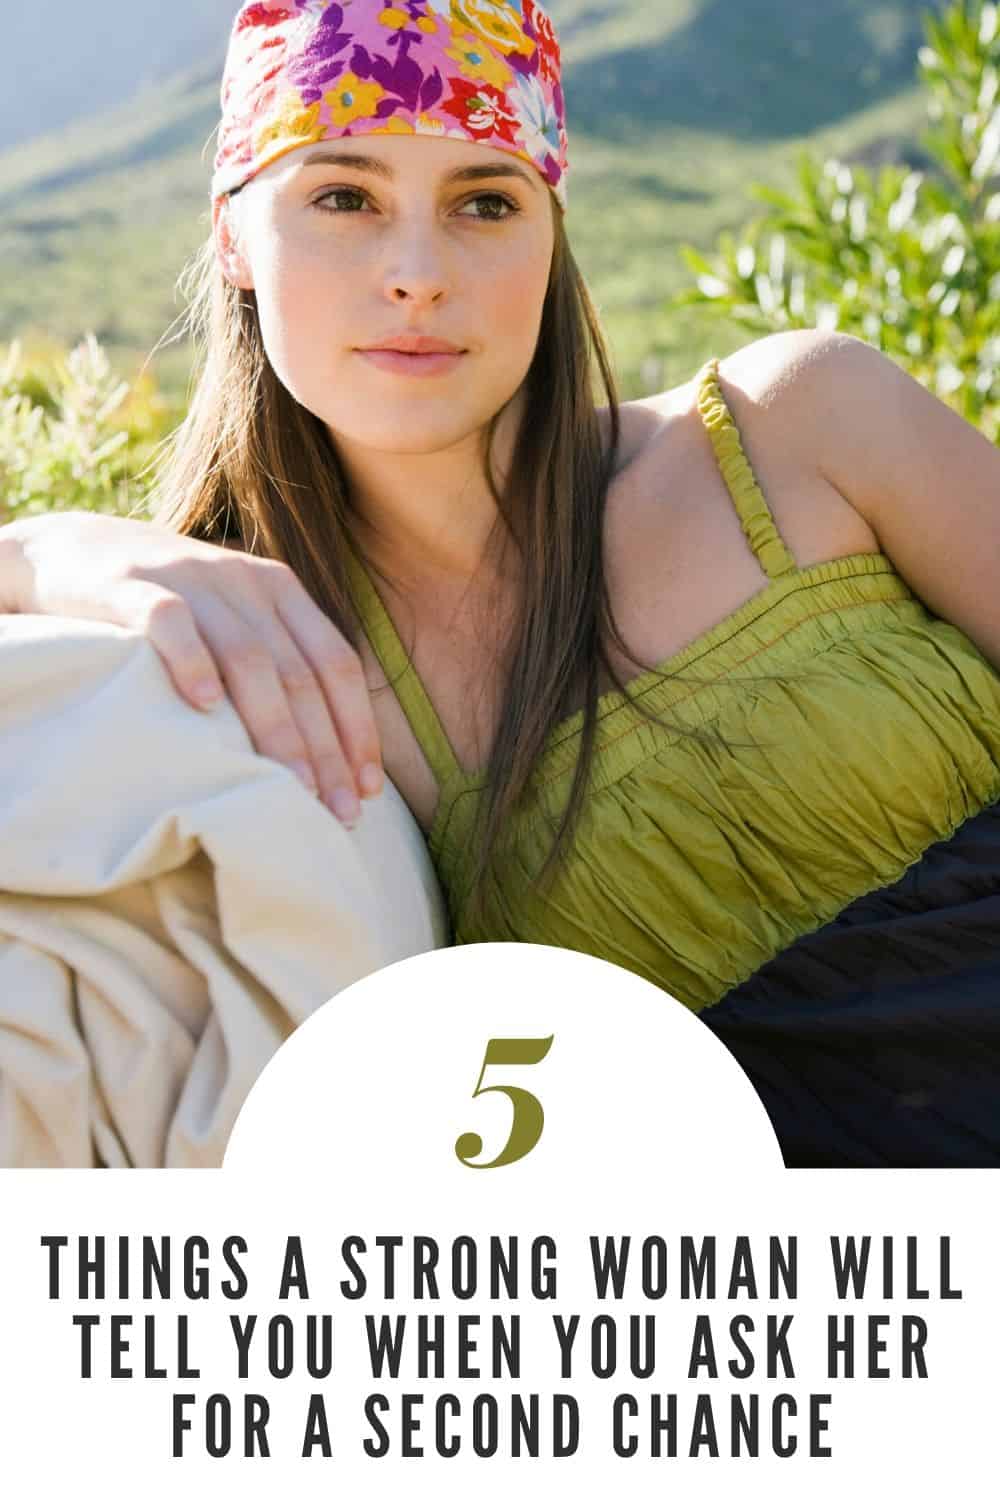 5 Things A Strong Woman Will Tell You When You Ask Her For A Second Chance